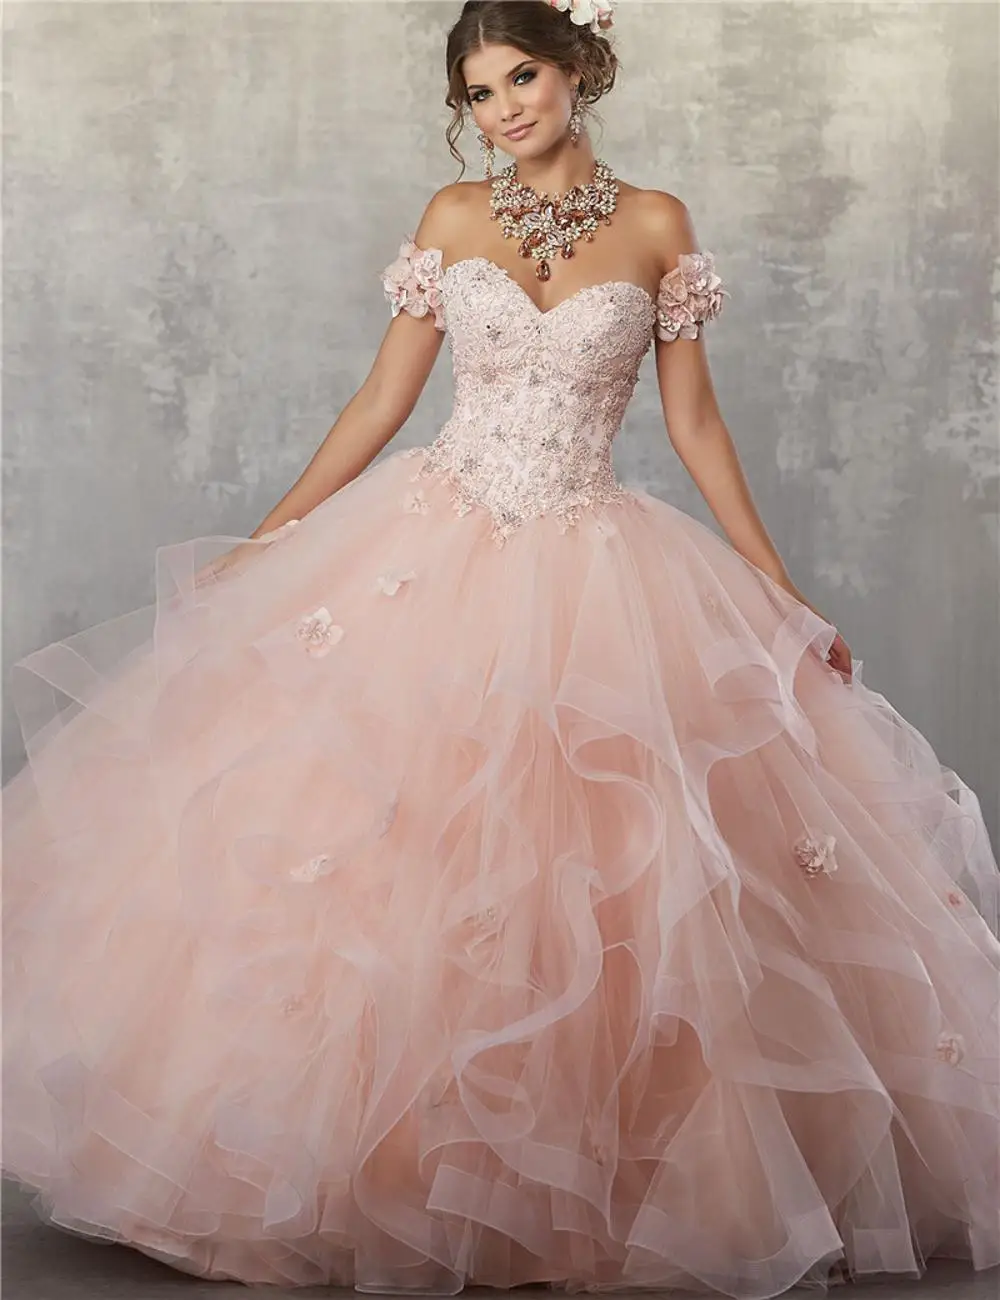 

Off The Shoulder Crystal Beads Coral Prom Ball Gown Quinceanera Dresses with Ruffles Flower Puffy Sweet 16 Dress NBW11